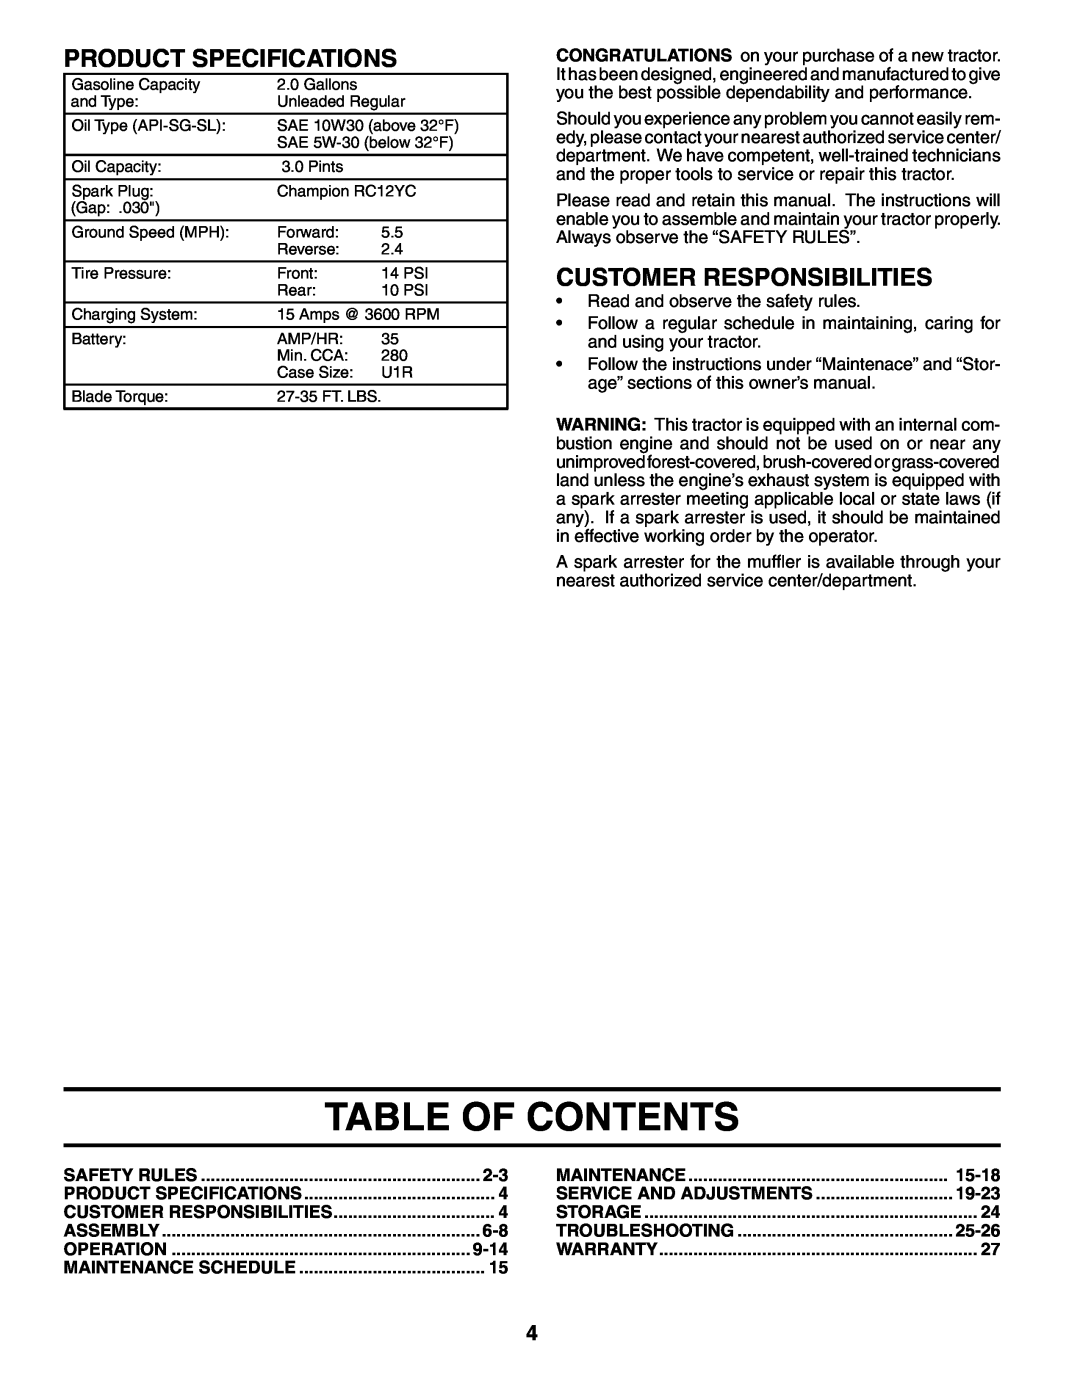 Poulan PK19H42LT manual Table Of Contents, Product Specifications, Customer Responsibilities, 9-14, 15-18, 19-23, 25-26 